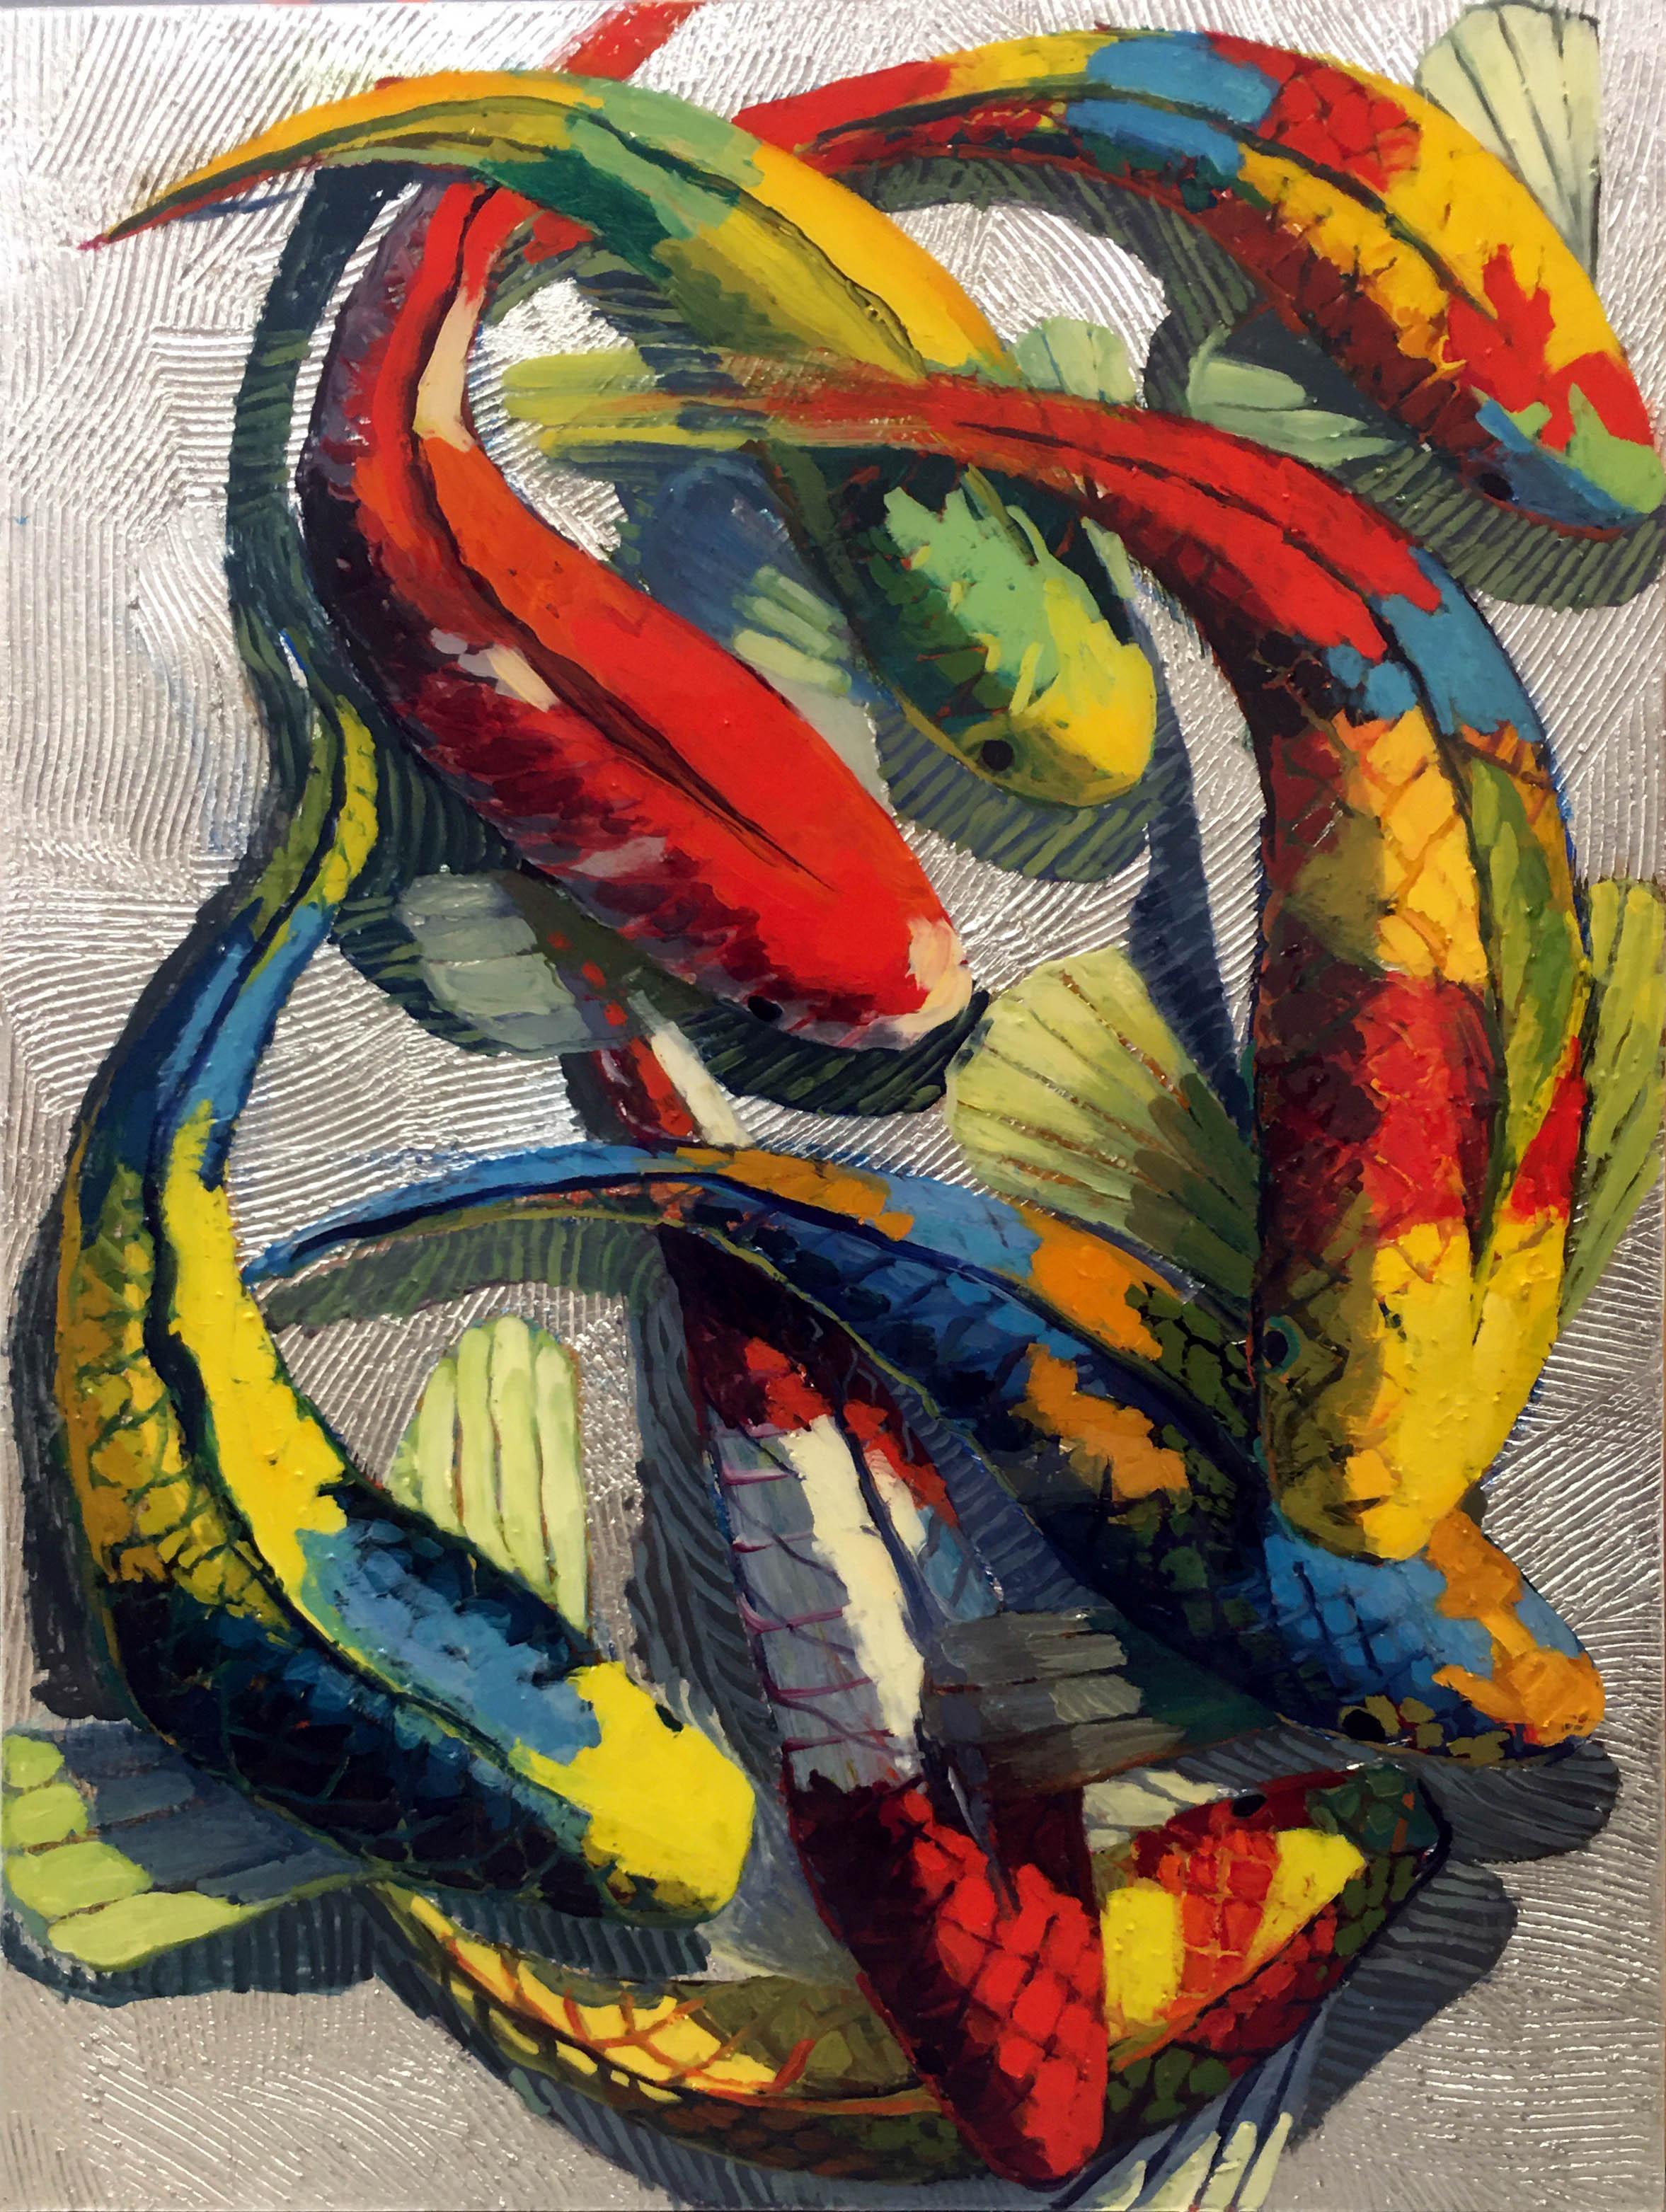 Serpentine Dance- Blue Yellow Koi on Silver 48 x 36 - Mixed Media Art by Frank Hyder